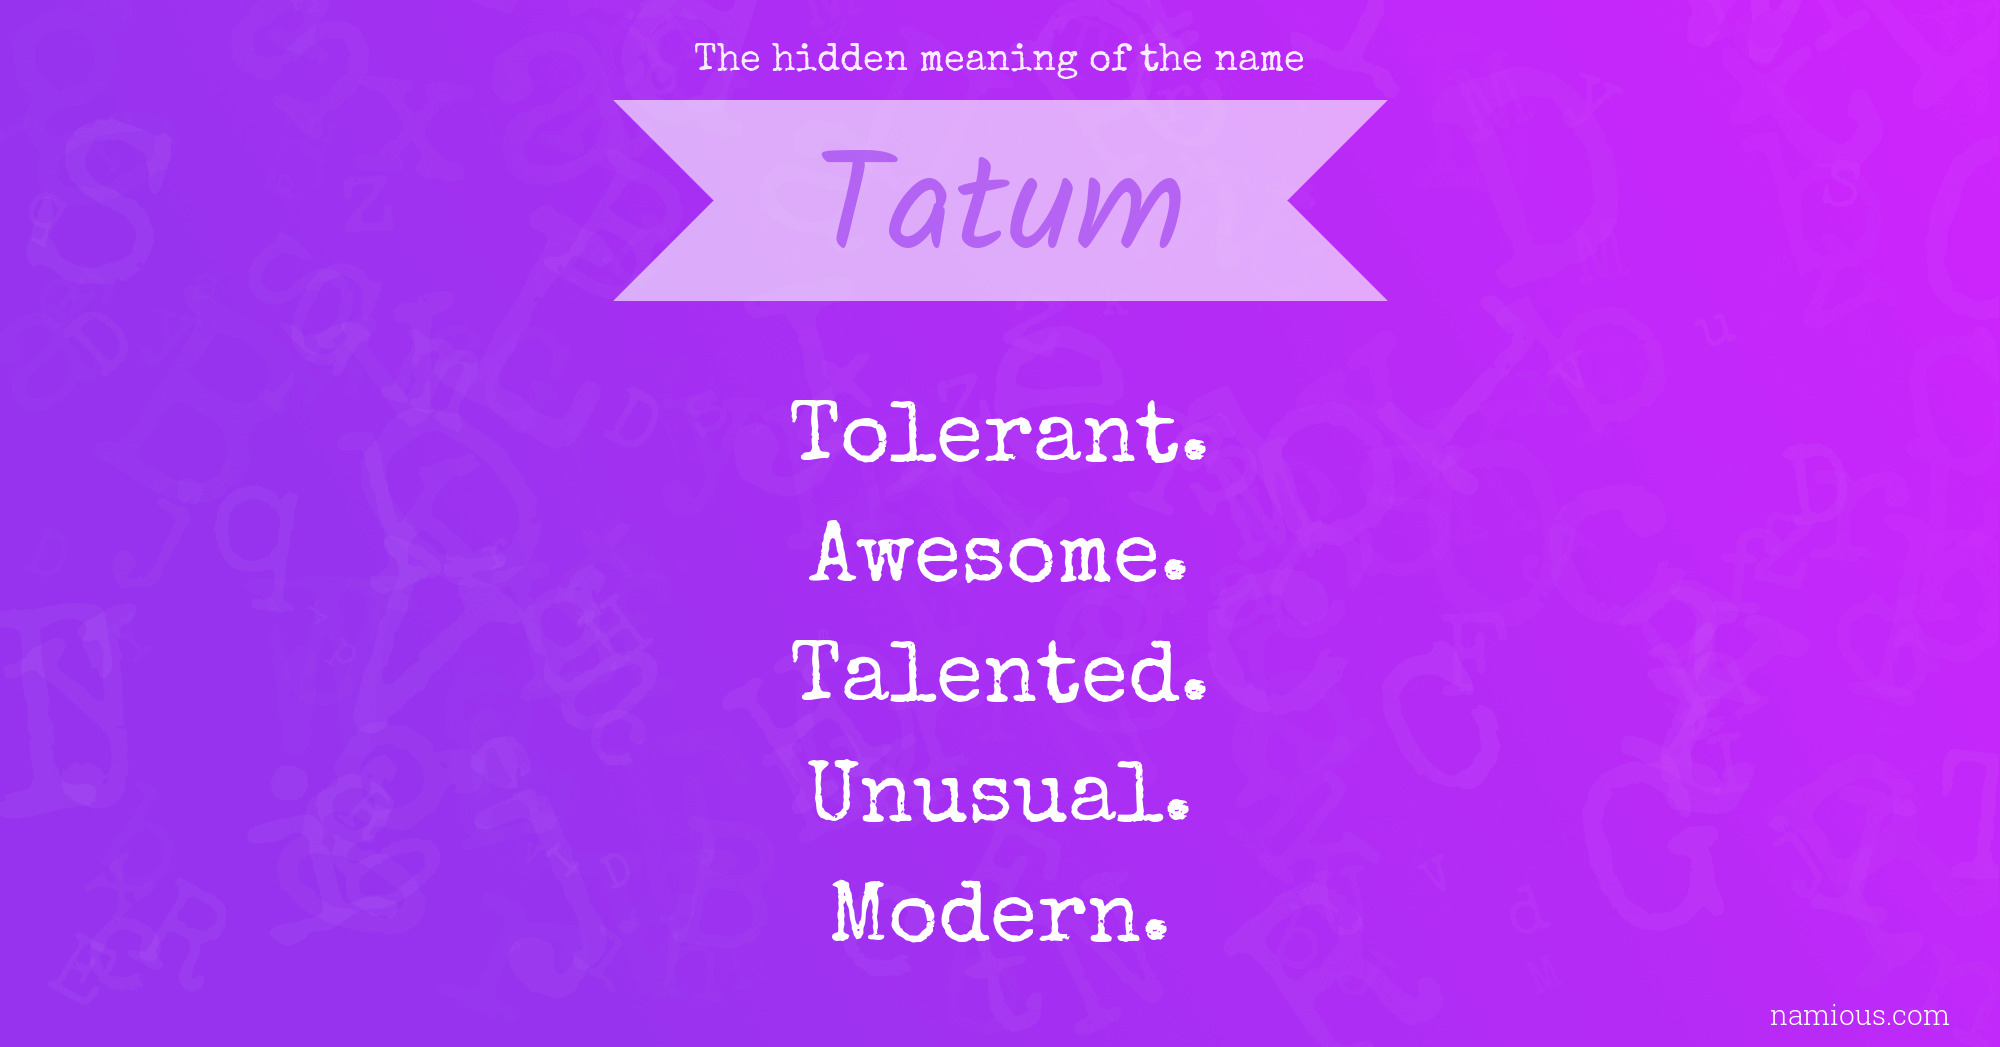 The hidden meaning of the name Tatum